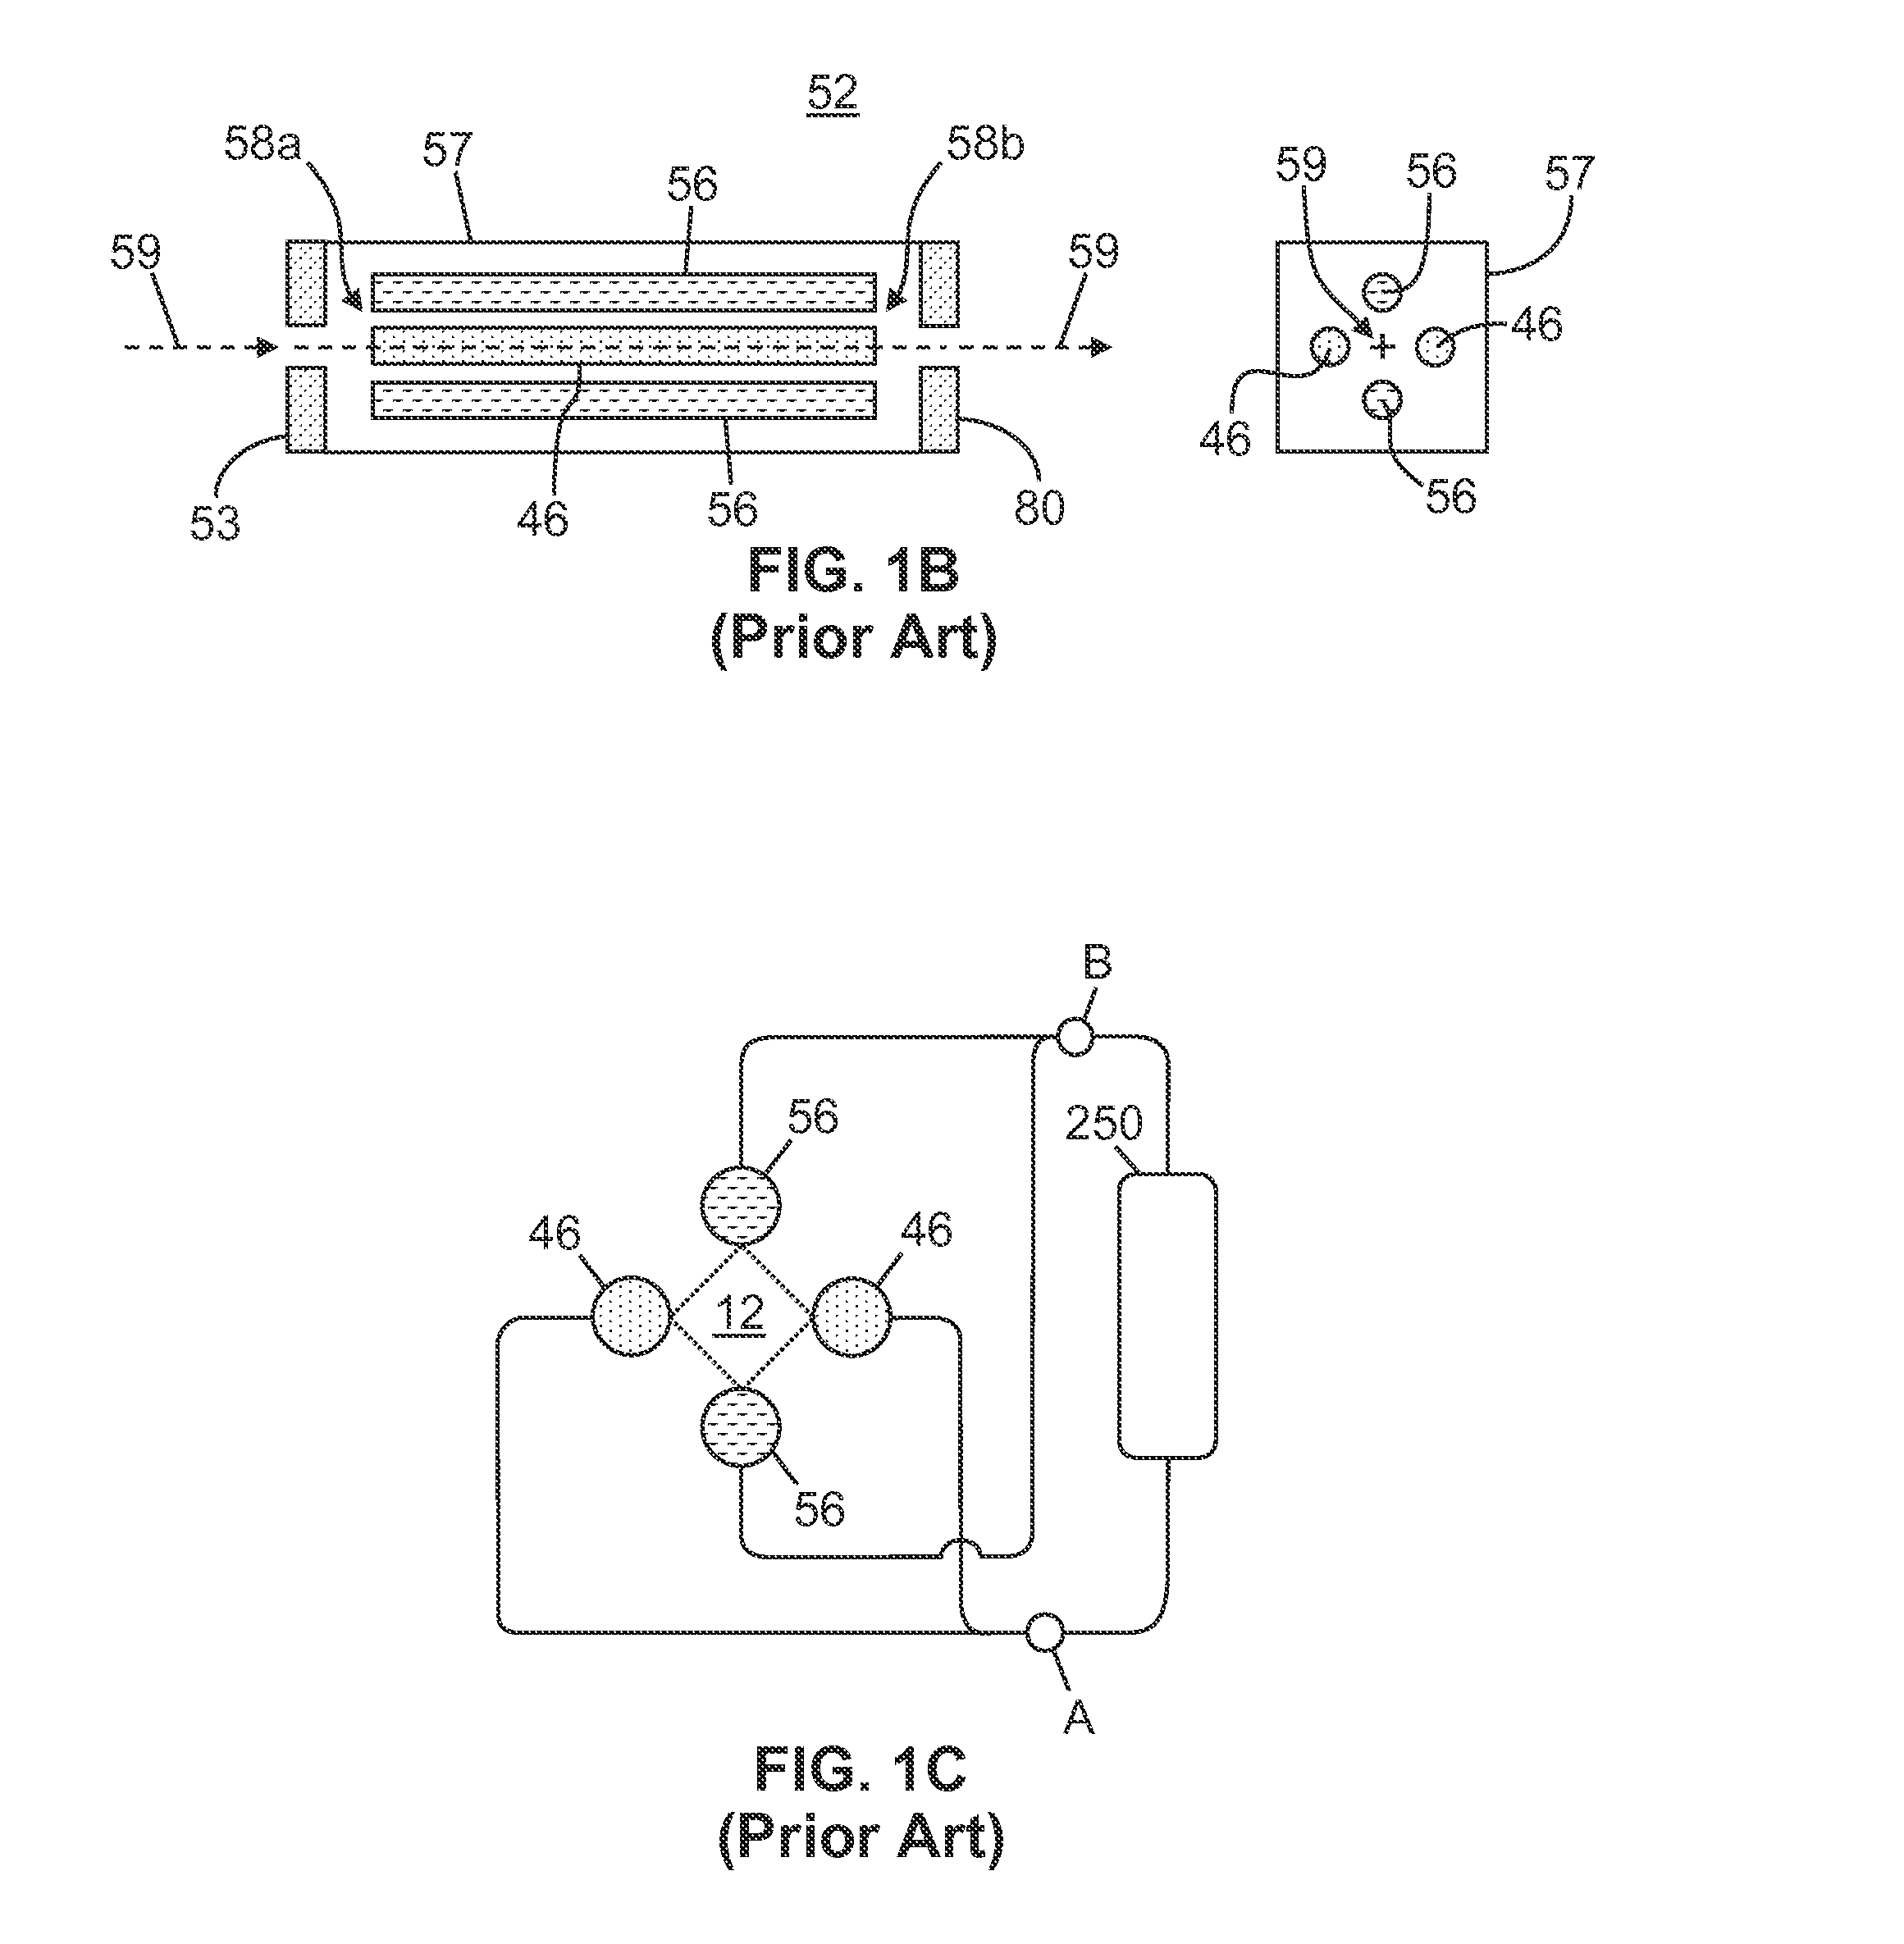 Method for Mass Spectrometer with Enhanced Sensitivity to Product Ions